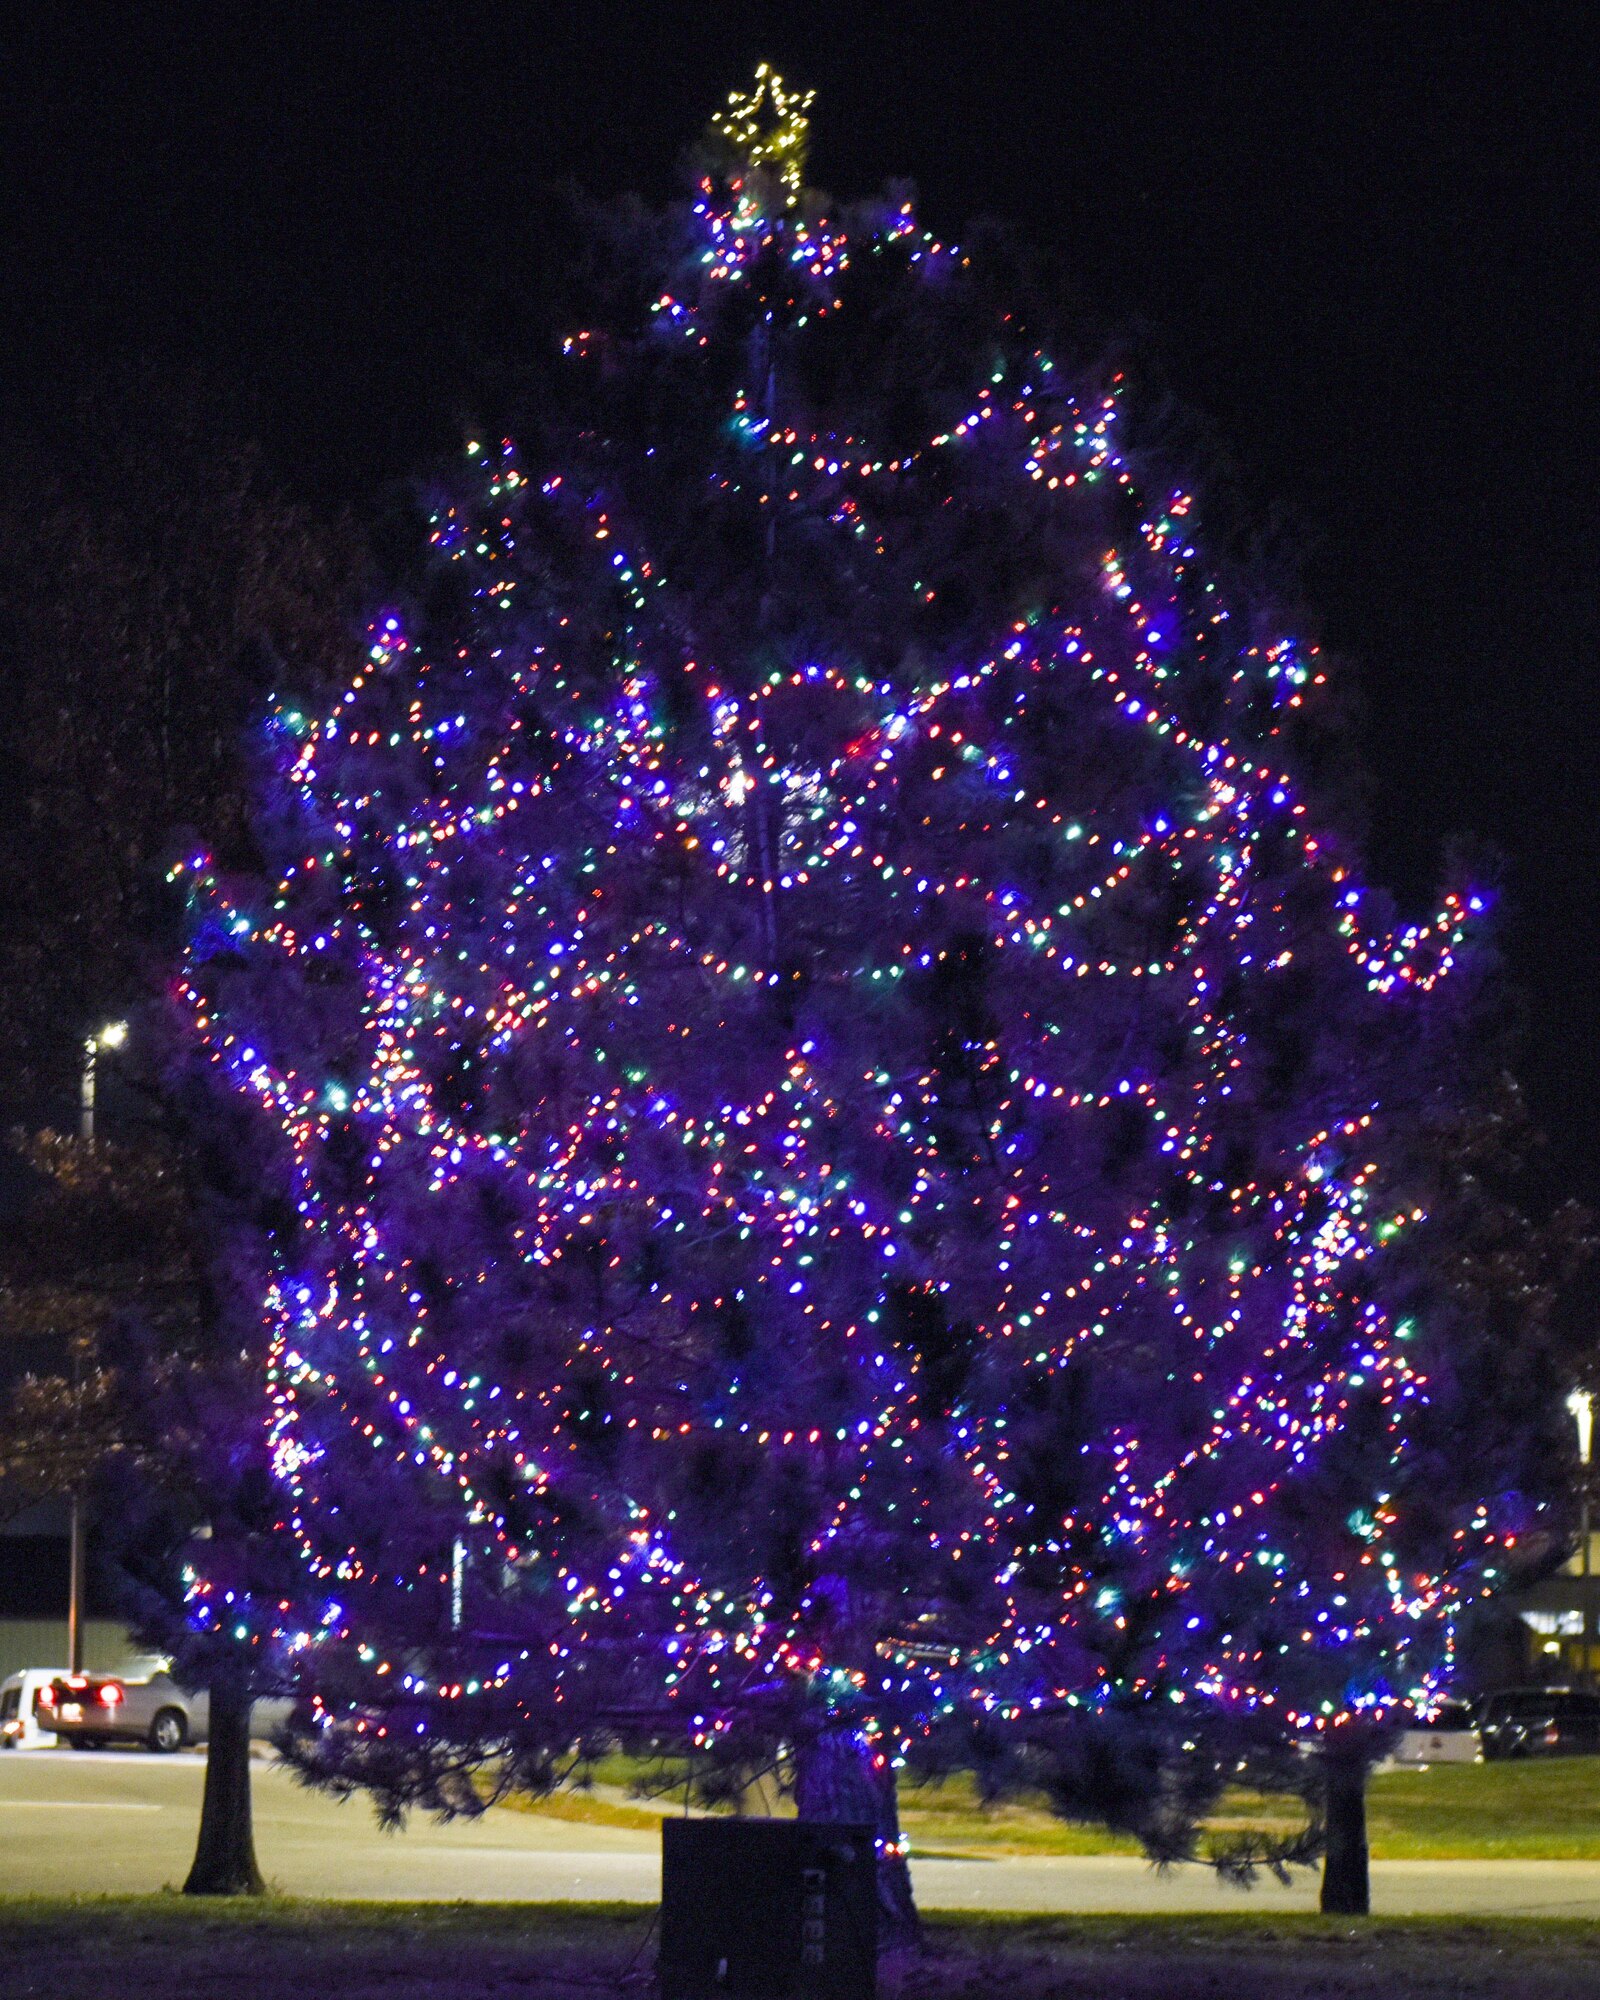 The holiday tree glows in front of the Mission’s End Club during the annual tree lighting event at Whiteman Air Force Base, Mo., Nov. 29, 2016. Approximately 1,400 people attended the wizard-themed event that kicked off the holidays in a magical way.